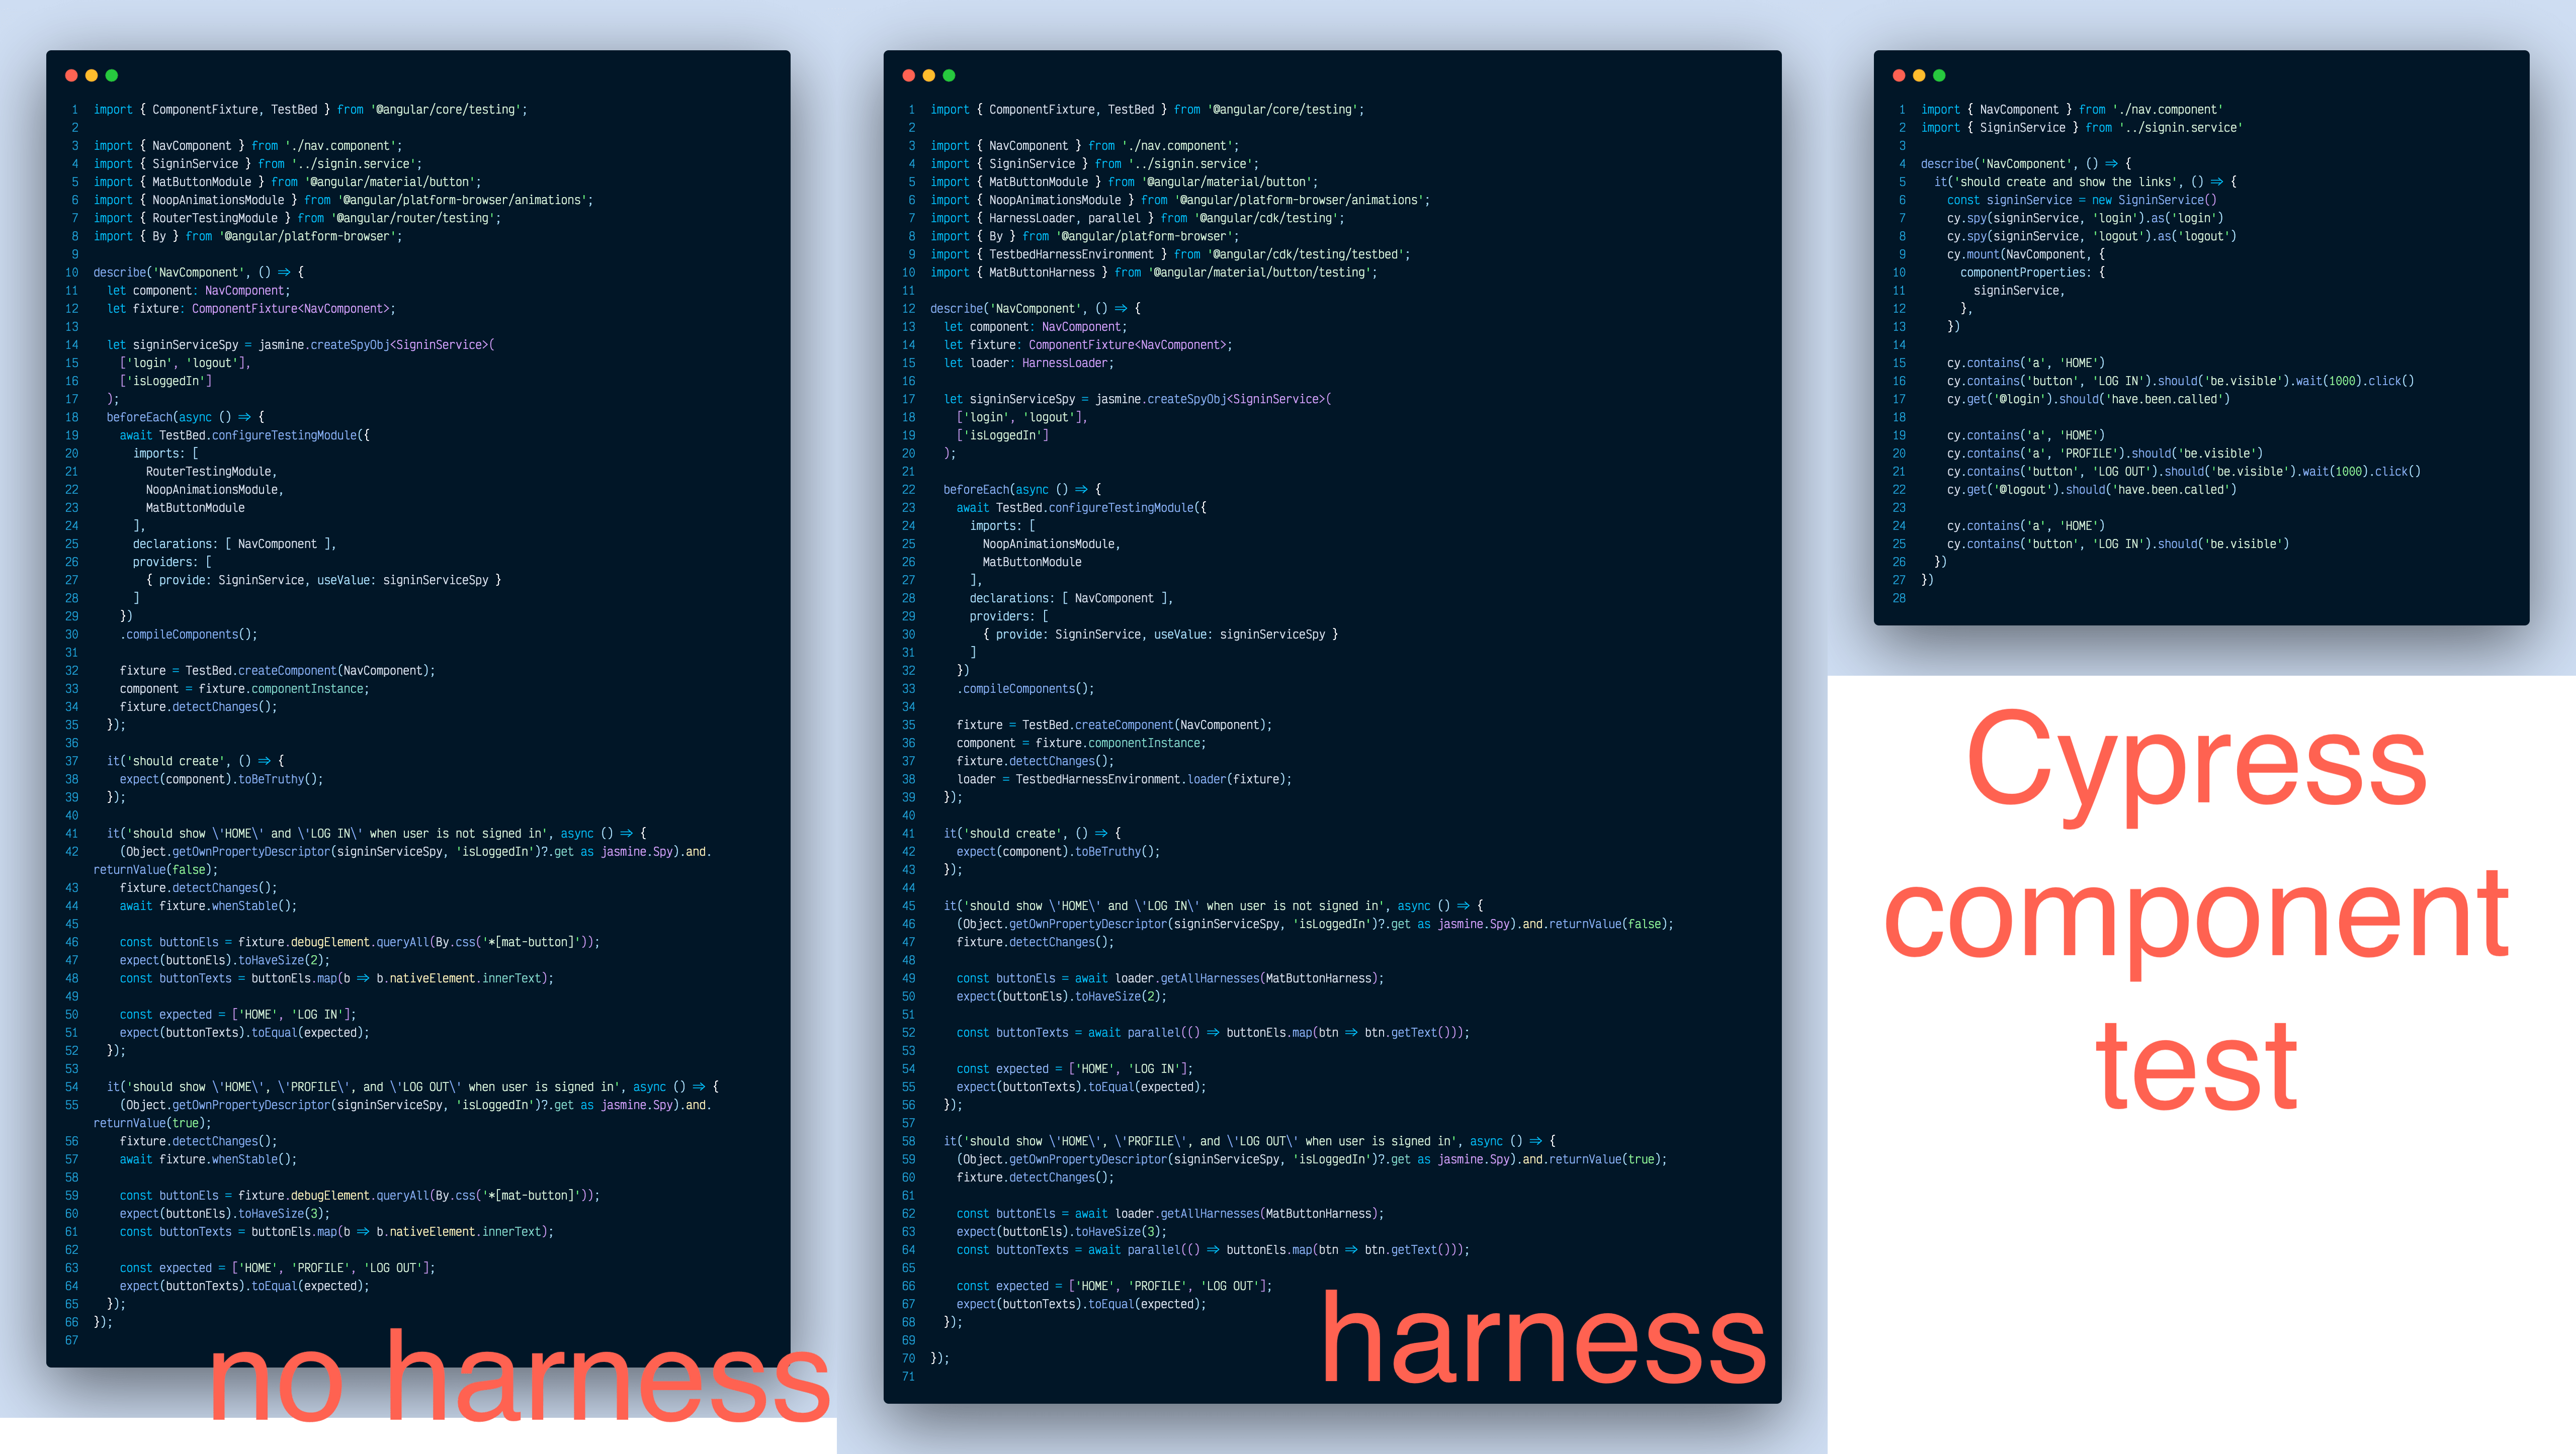 TestBed vs Cypress component test